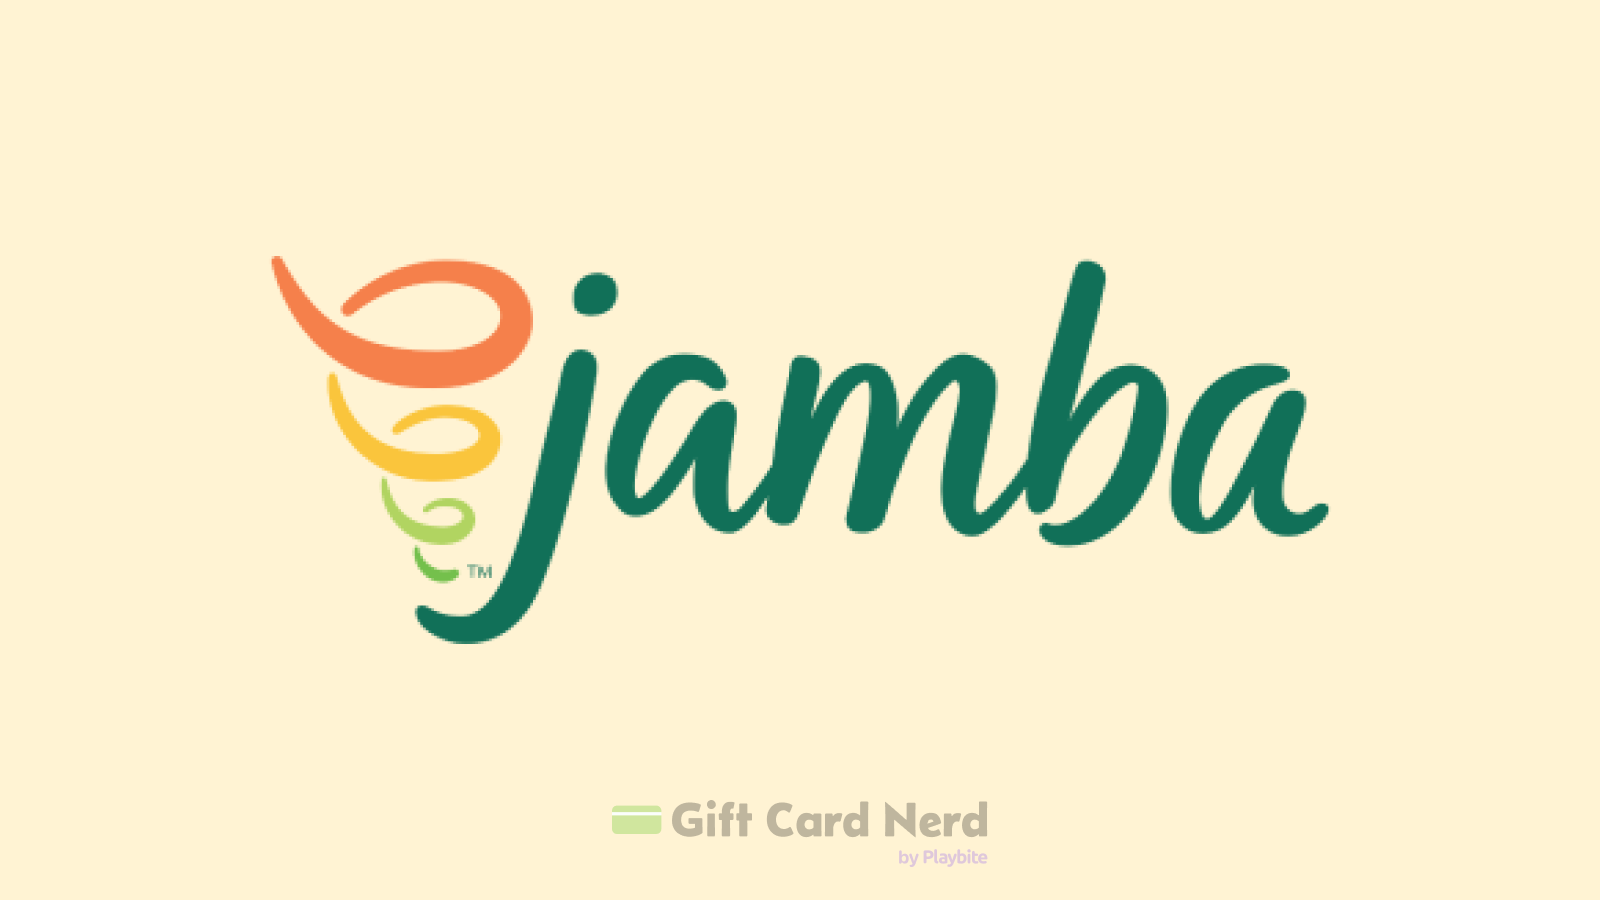 Does Target Sell Jamba Juice Gift Cards?